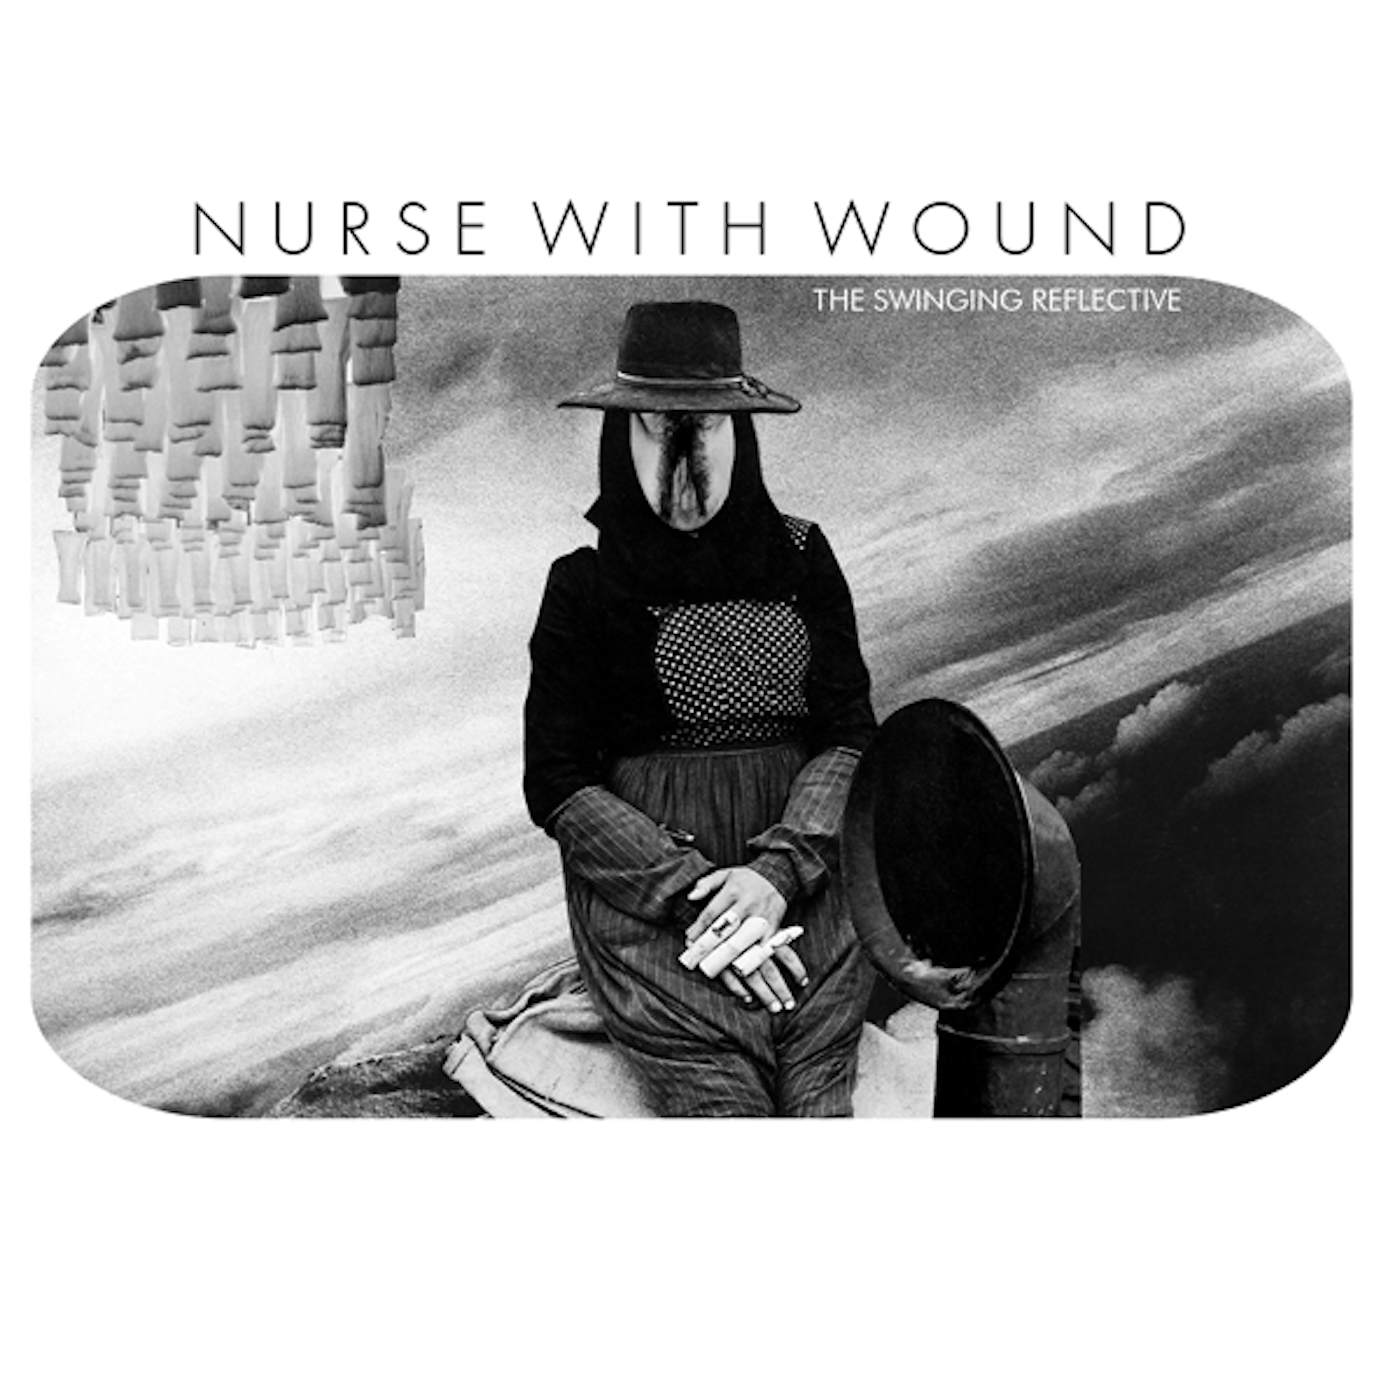 Nurse With Wound SWINGING REFLECTIVE CD